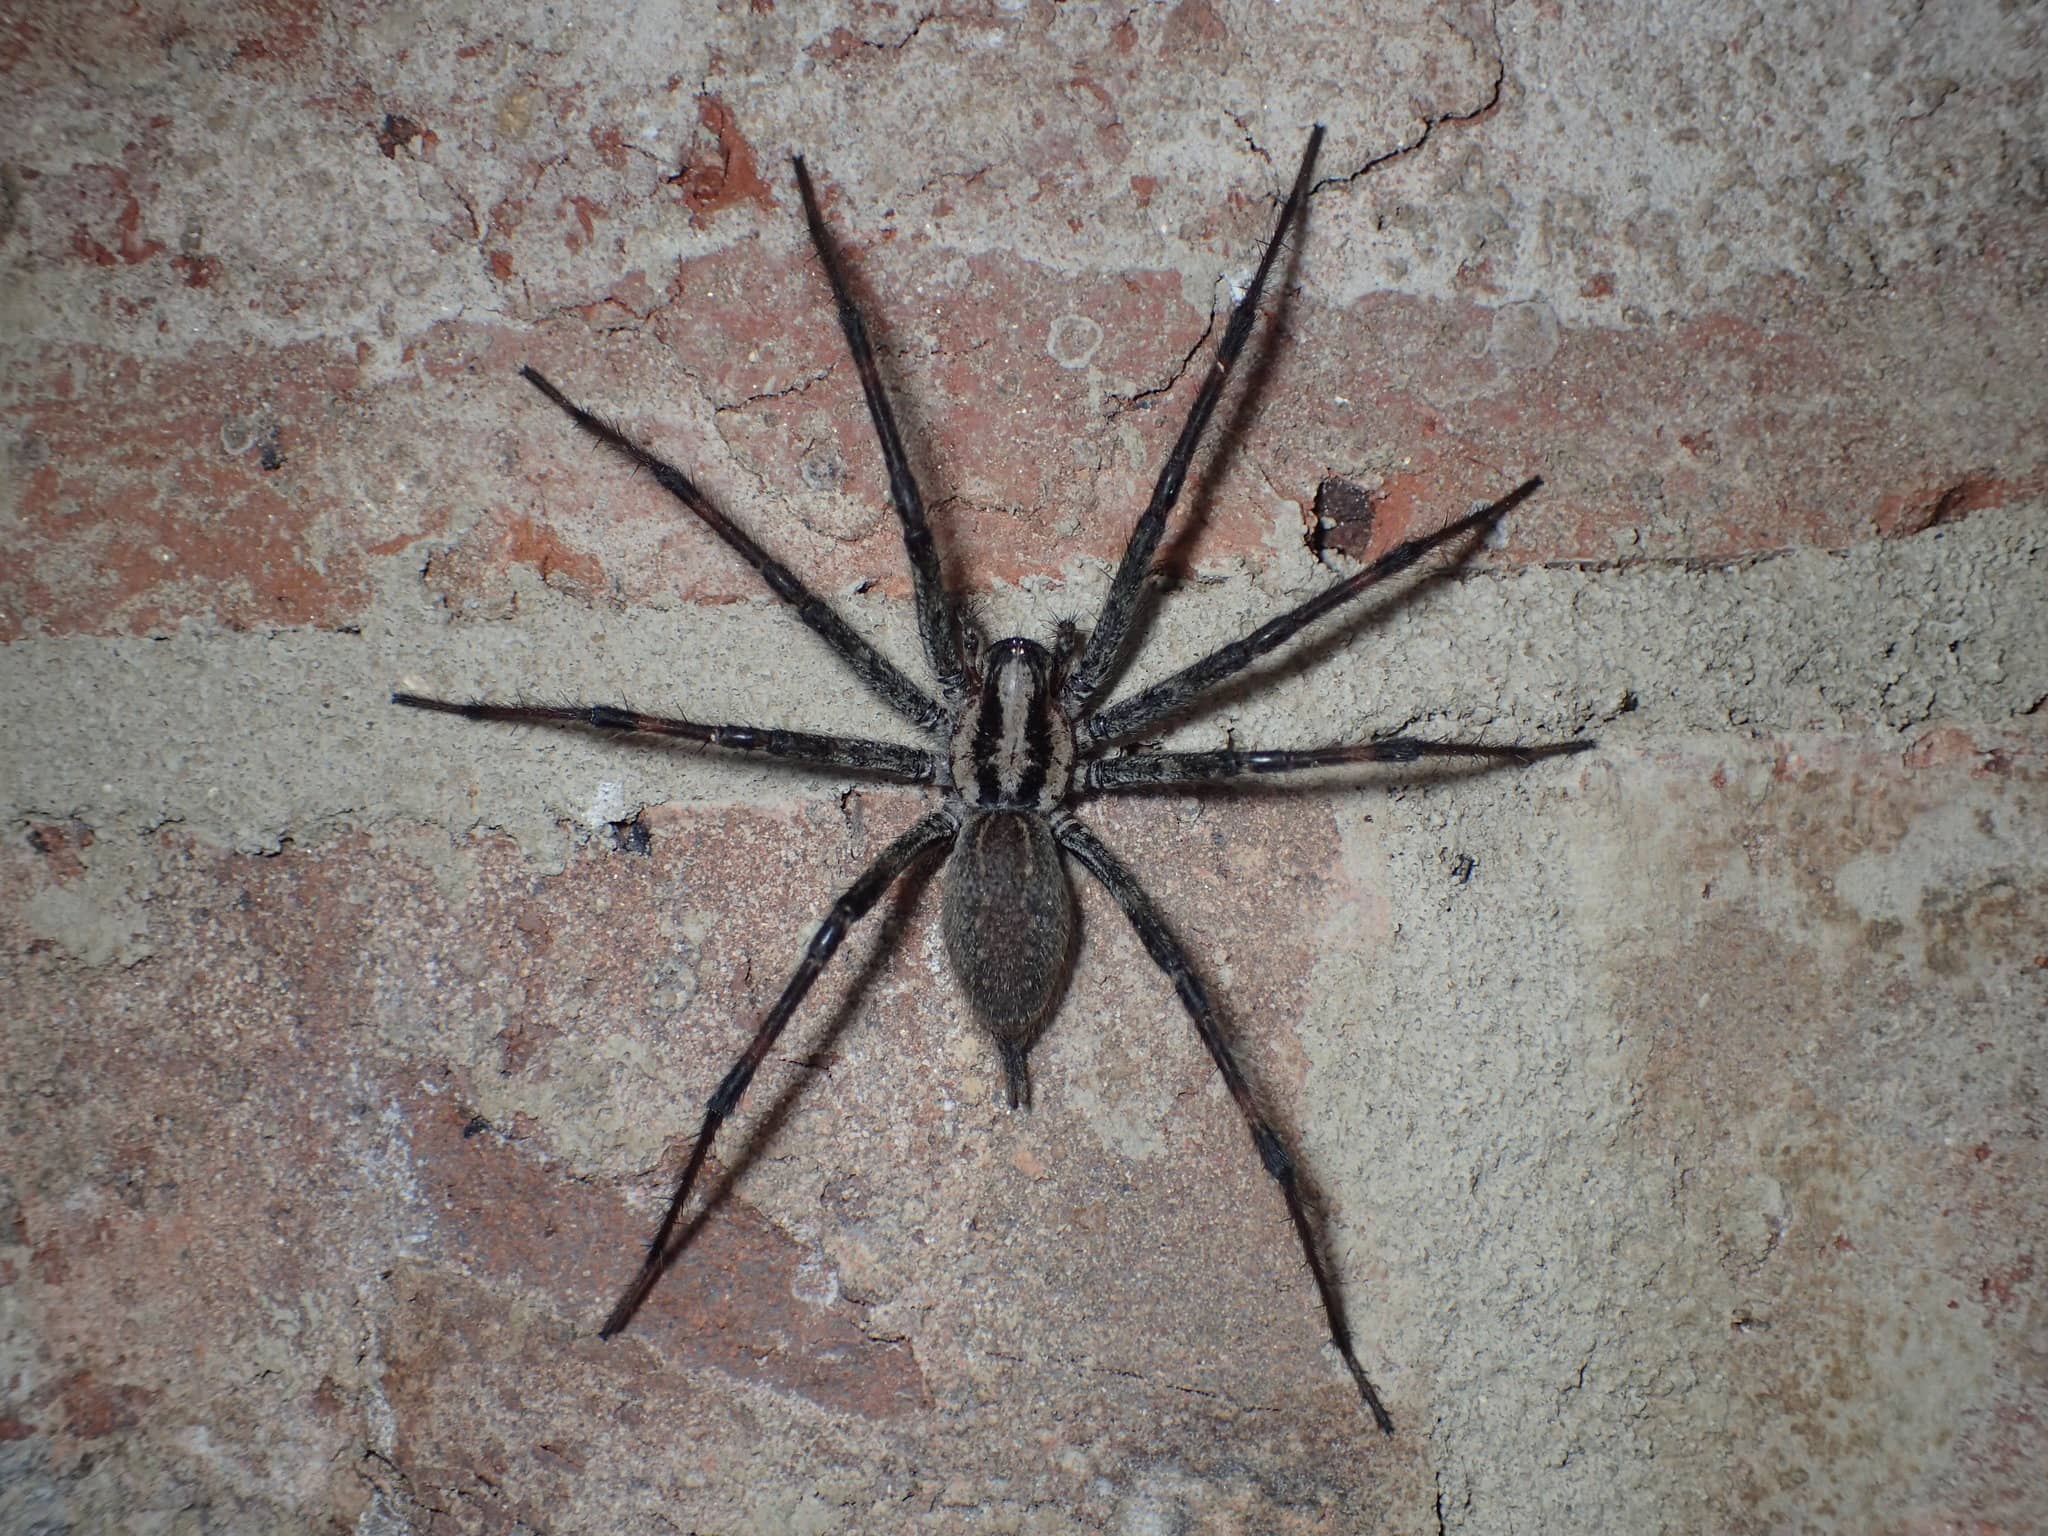 Picture of Agelenopsis naevia - Dorsal